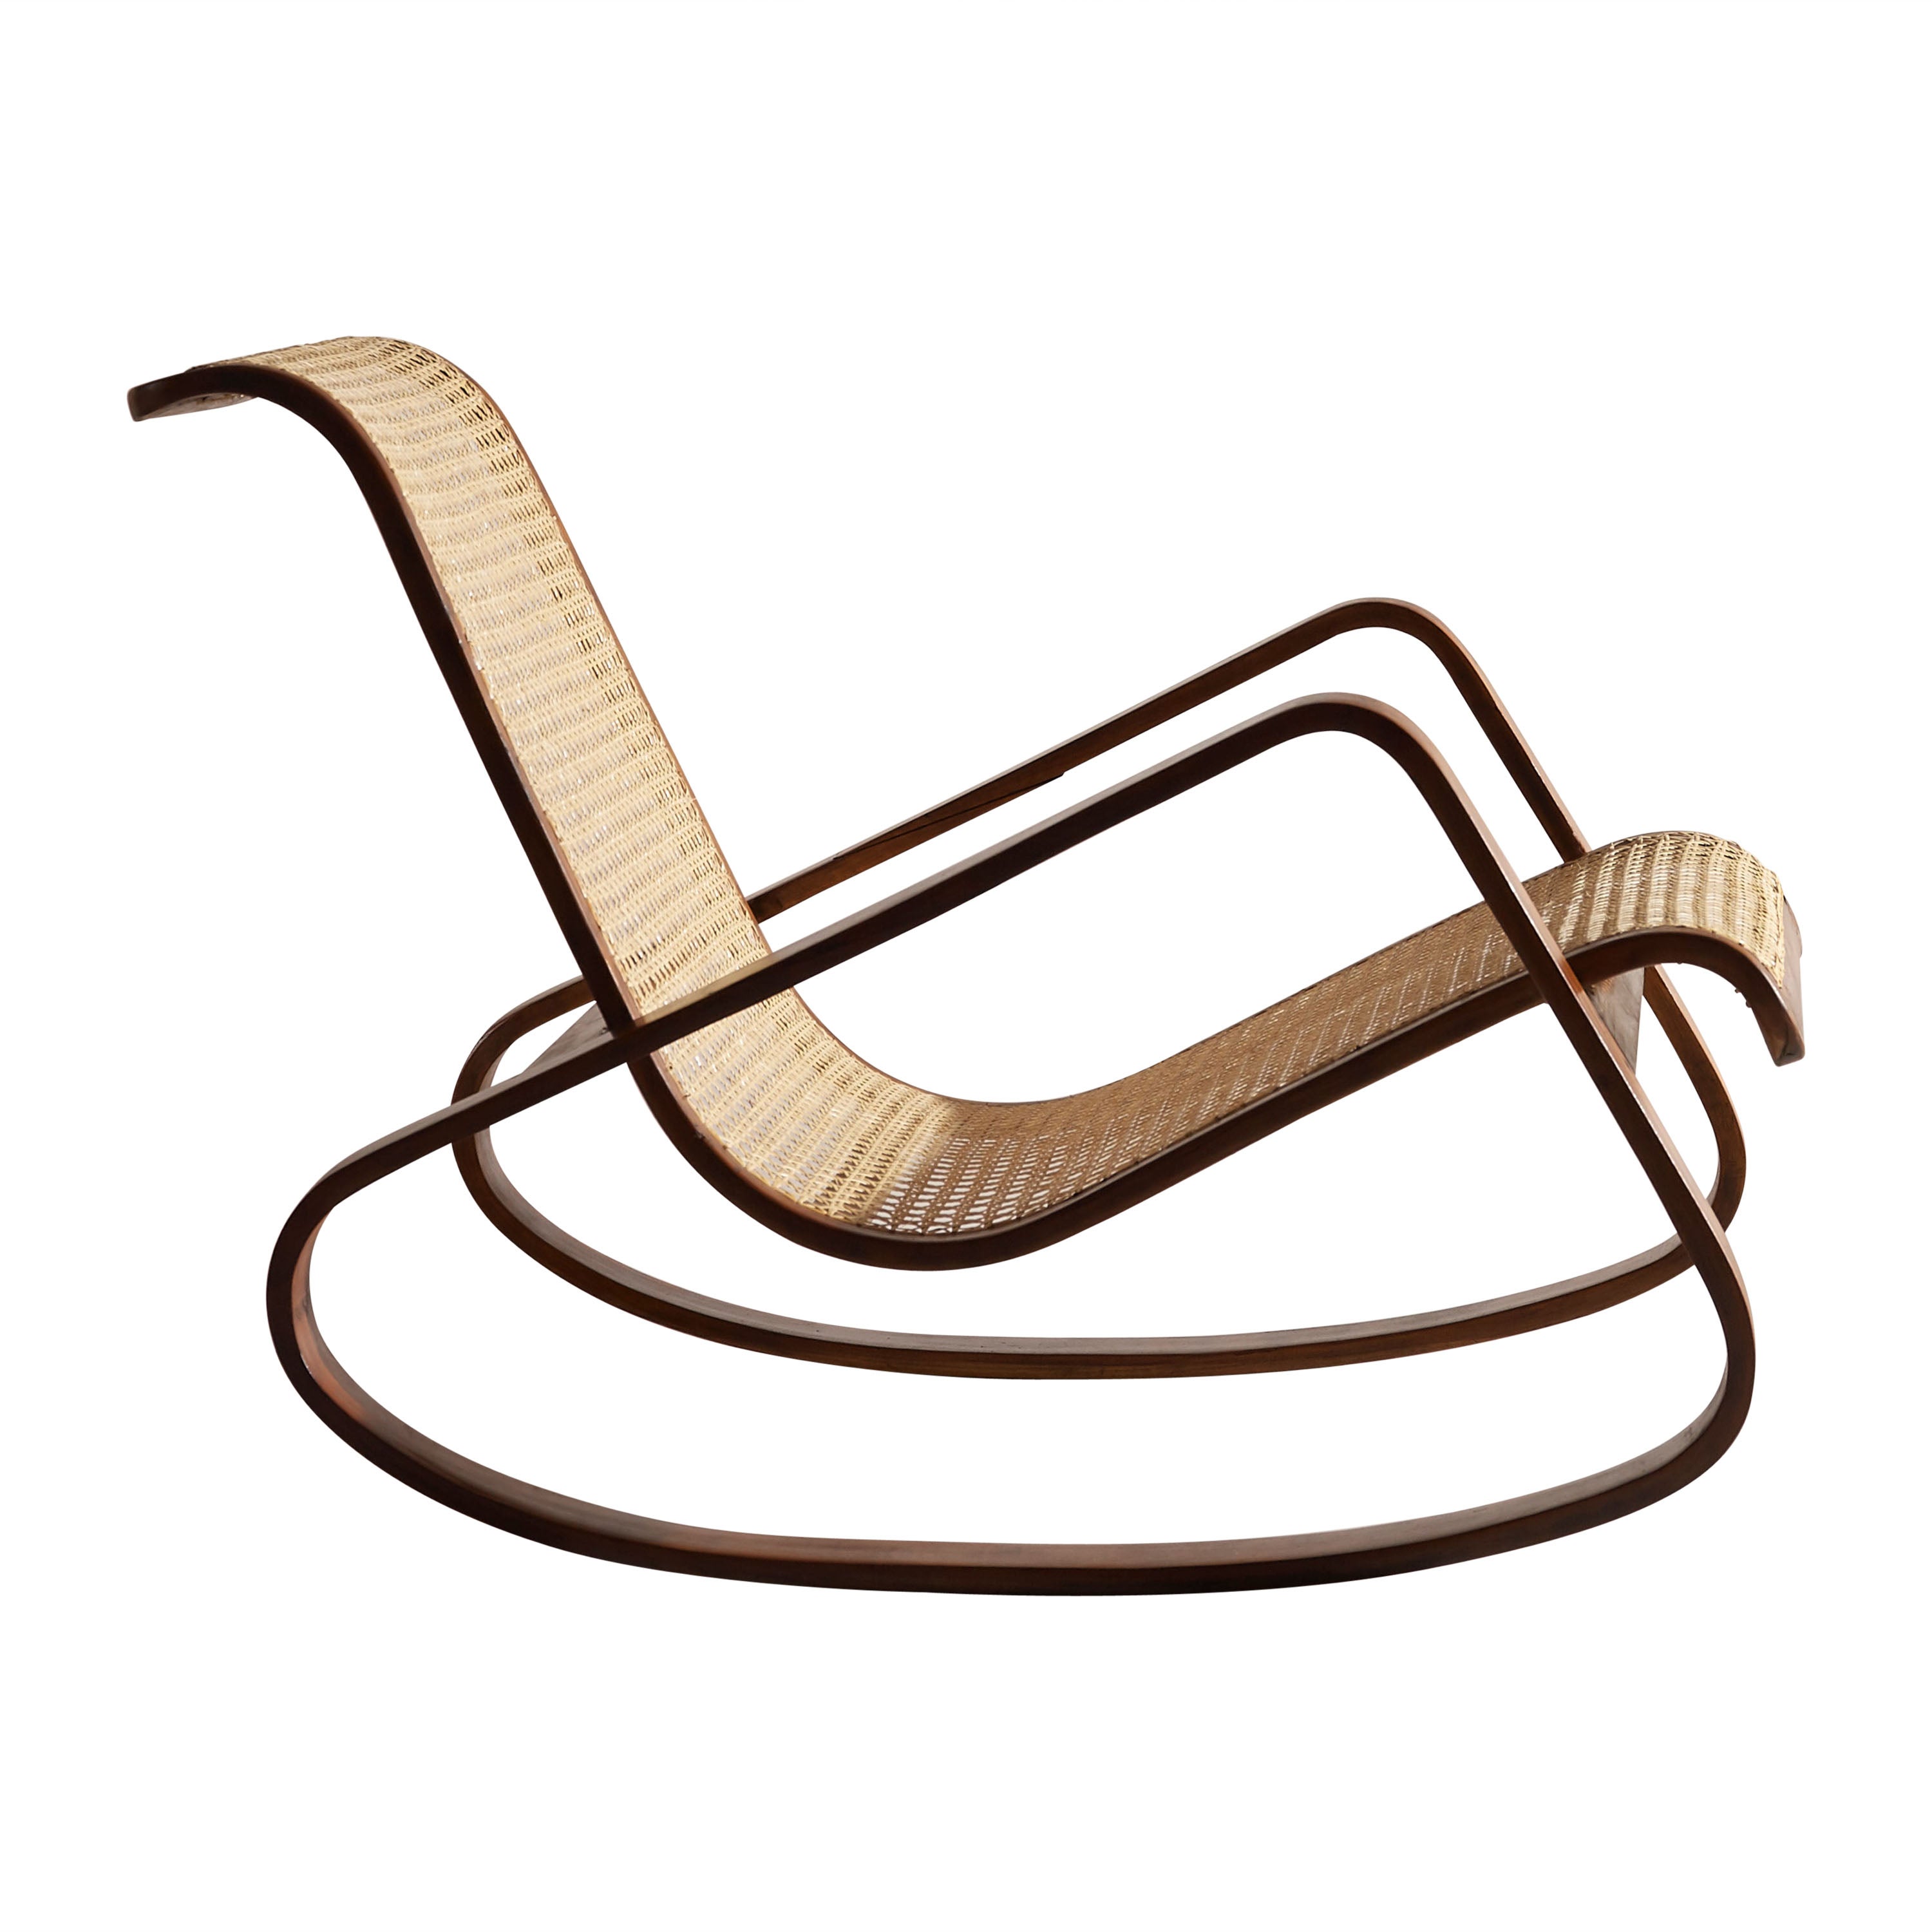 Caned Rocking Chair Made by Porino, Italy, 1930s